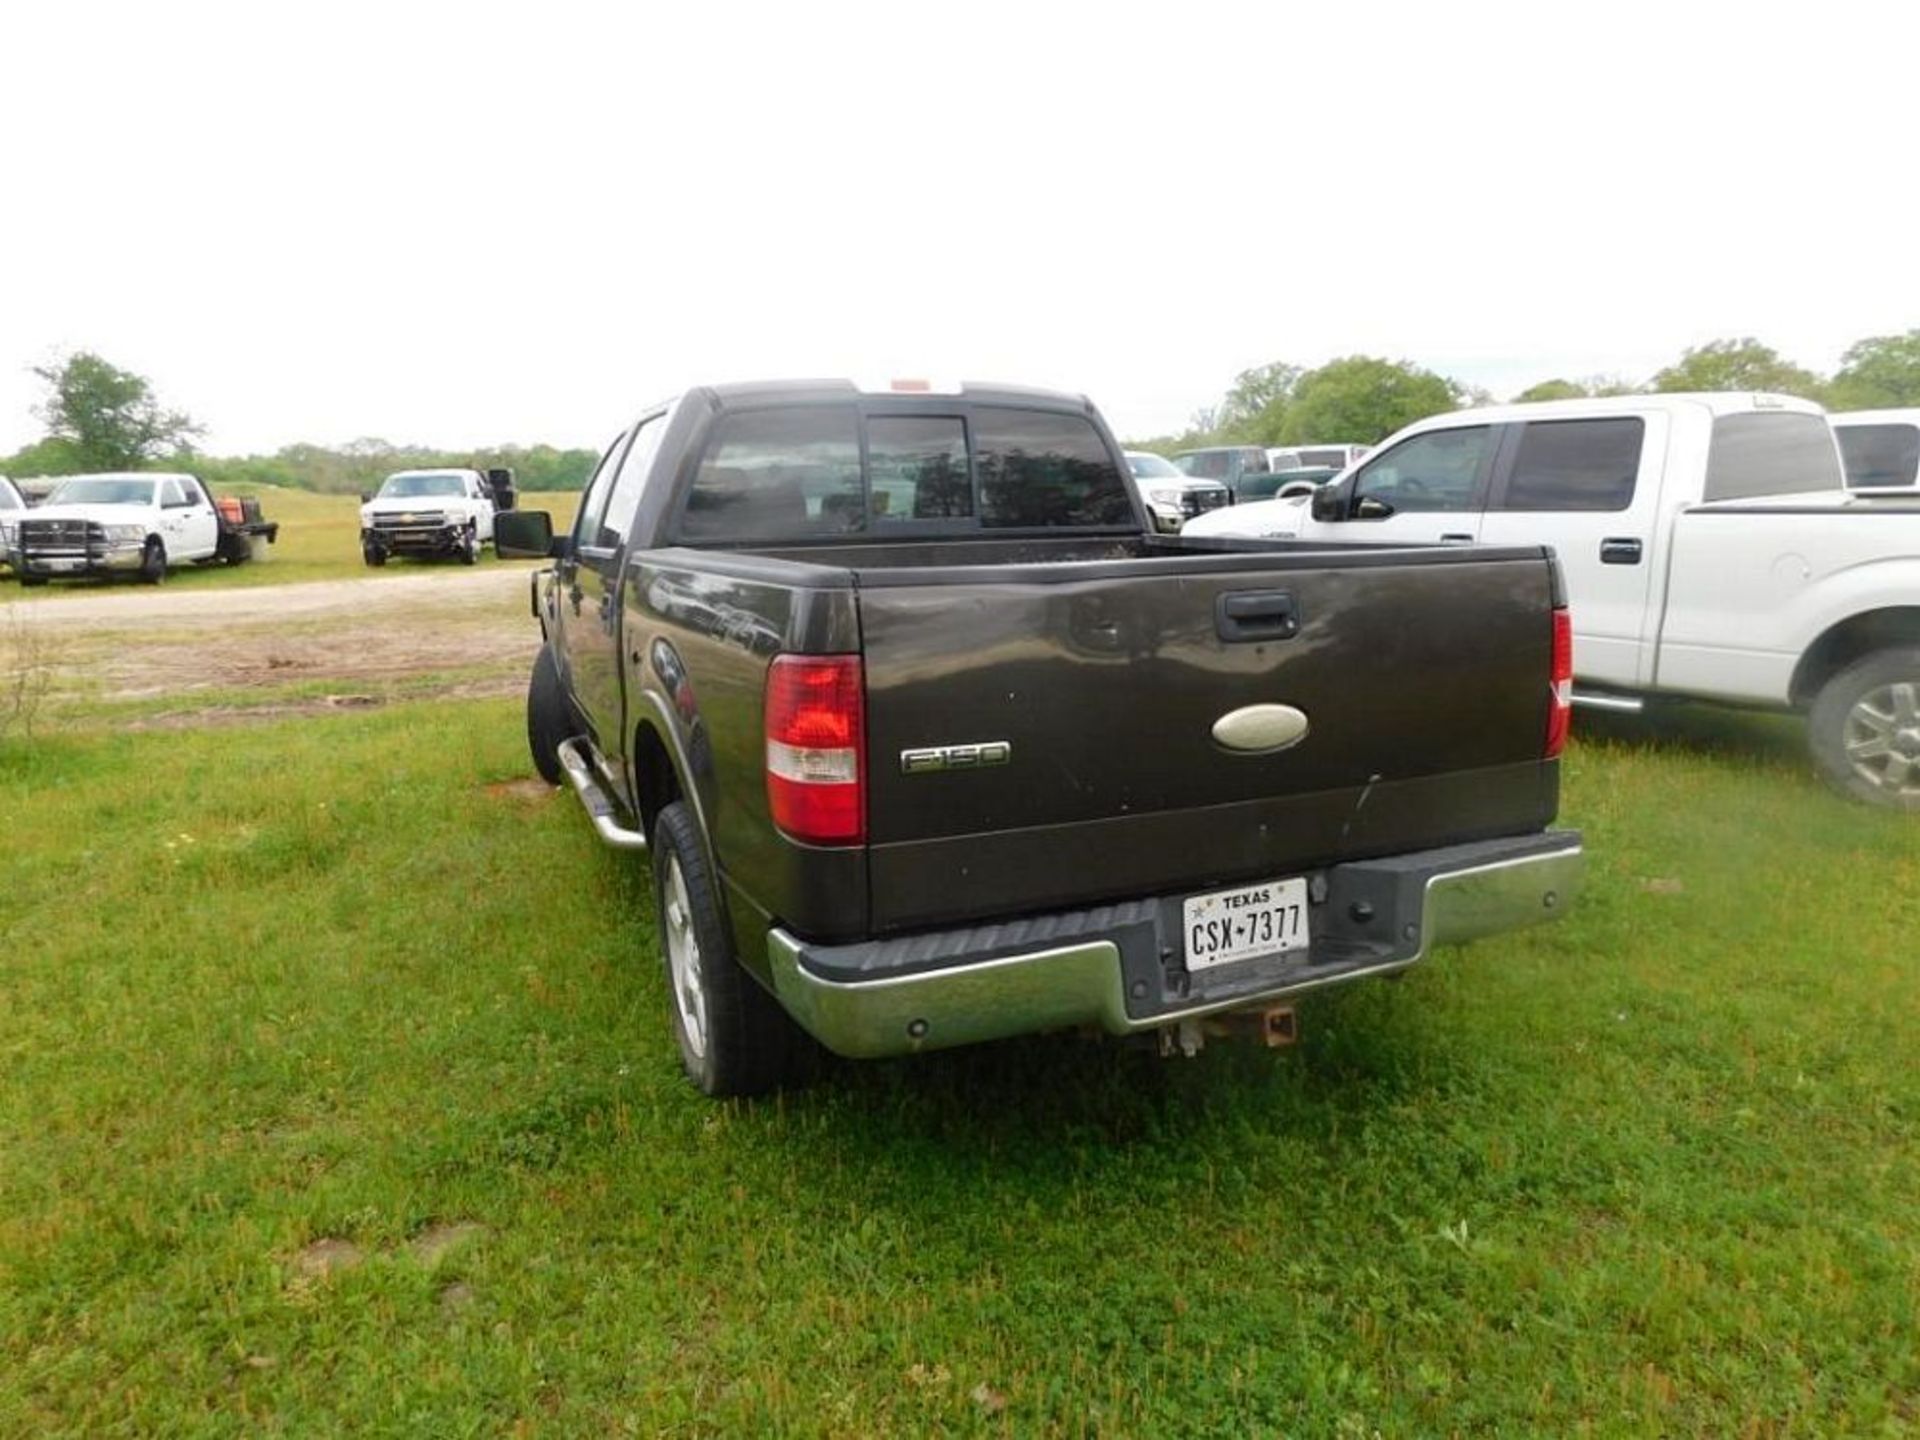 2007 Ford F-150 Lariat 4x4 Crew Cab Pick-up Truck, VIN N/A, 5-1/2 ft. Bed, 5.4 Liter Triton Gasoline - Image 4 of 4